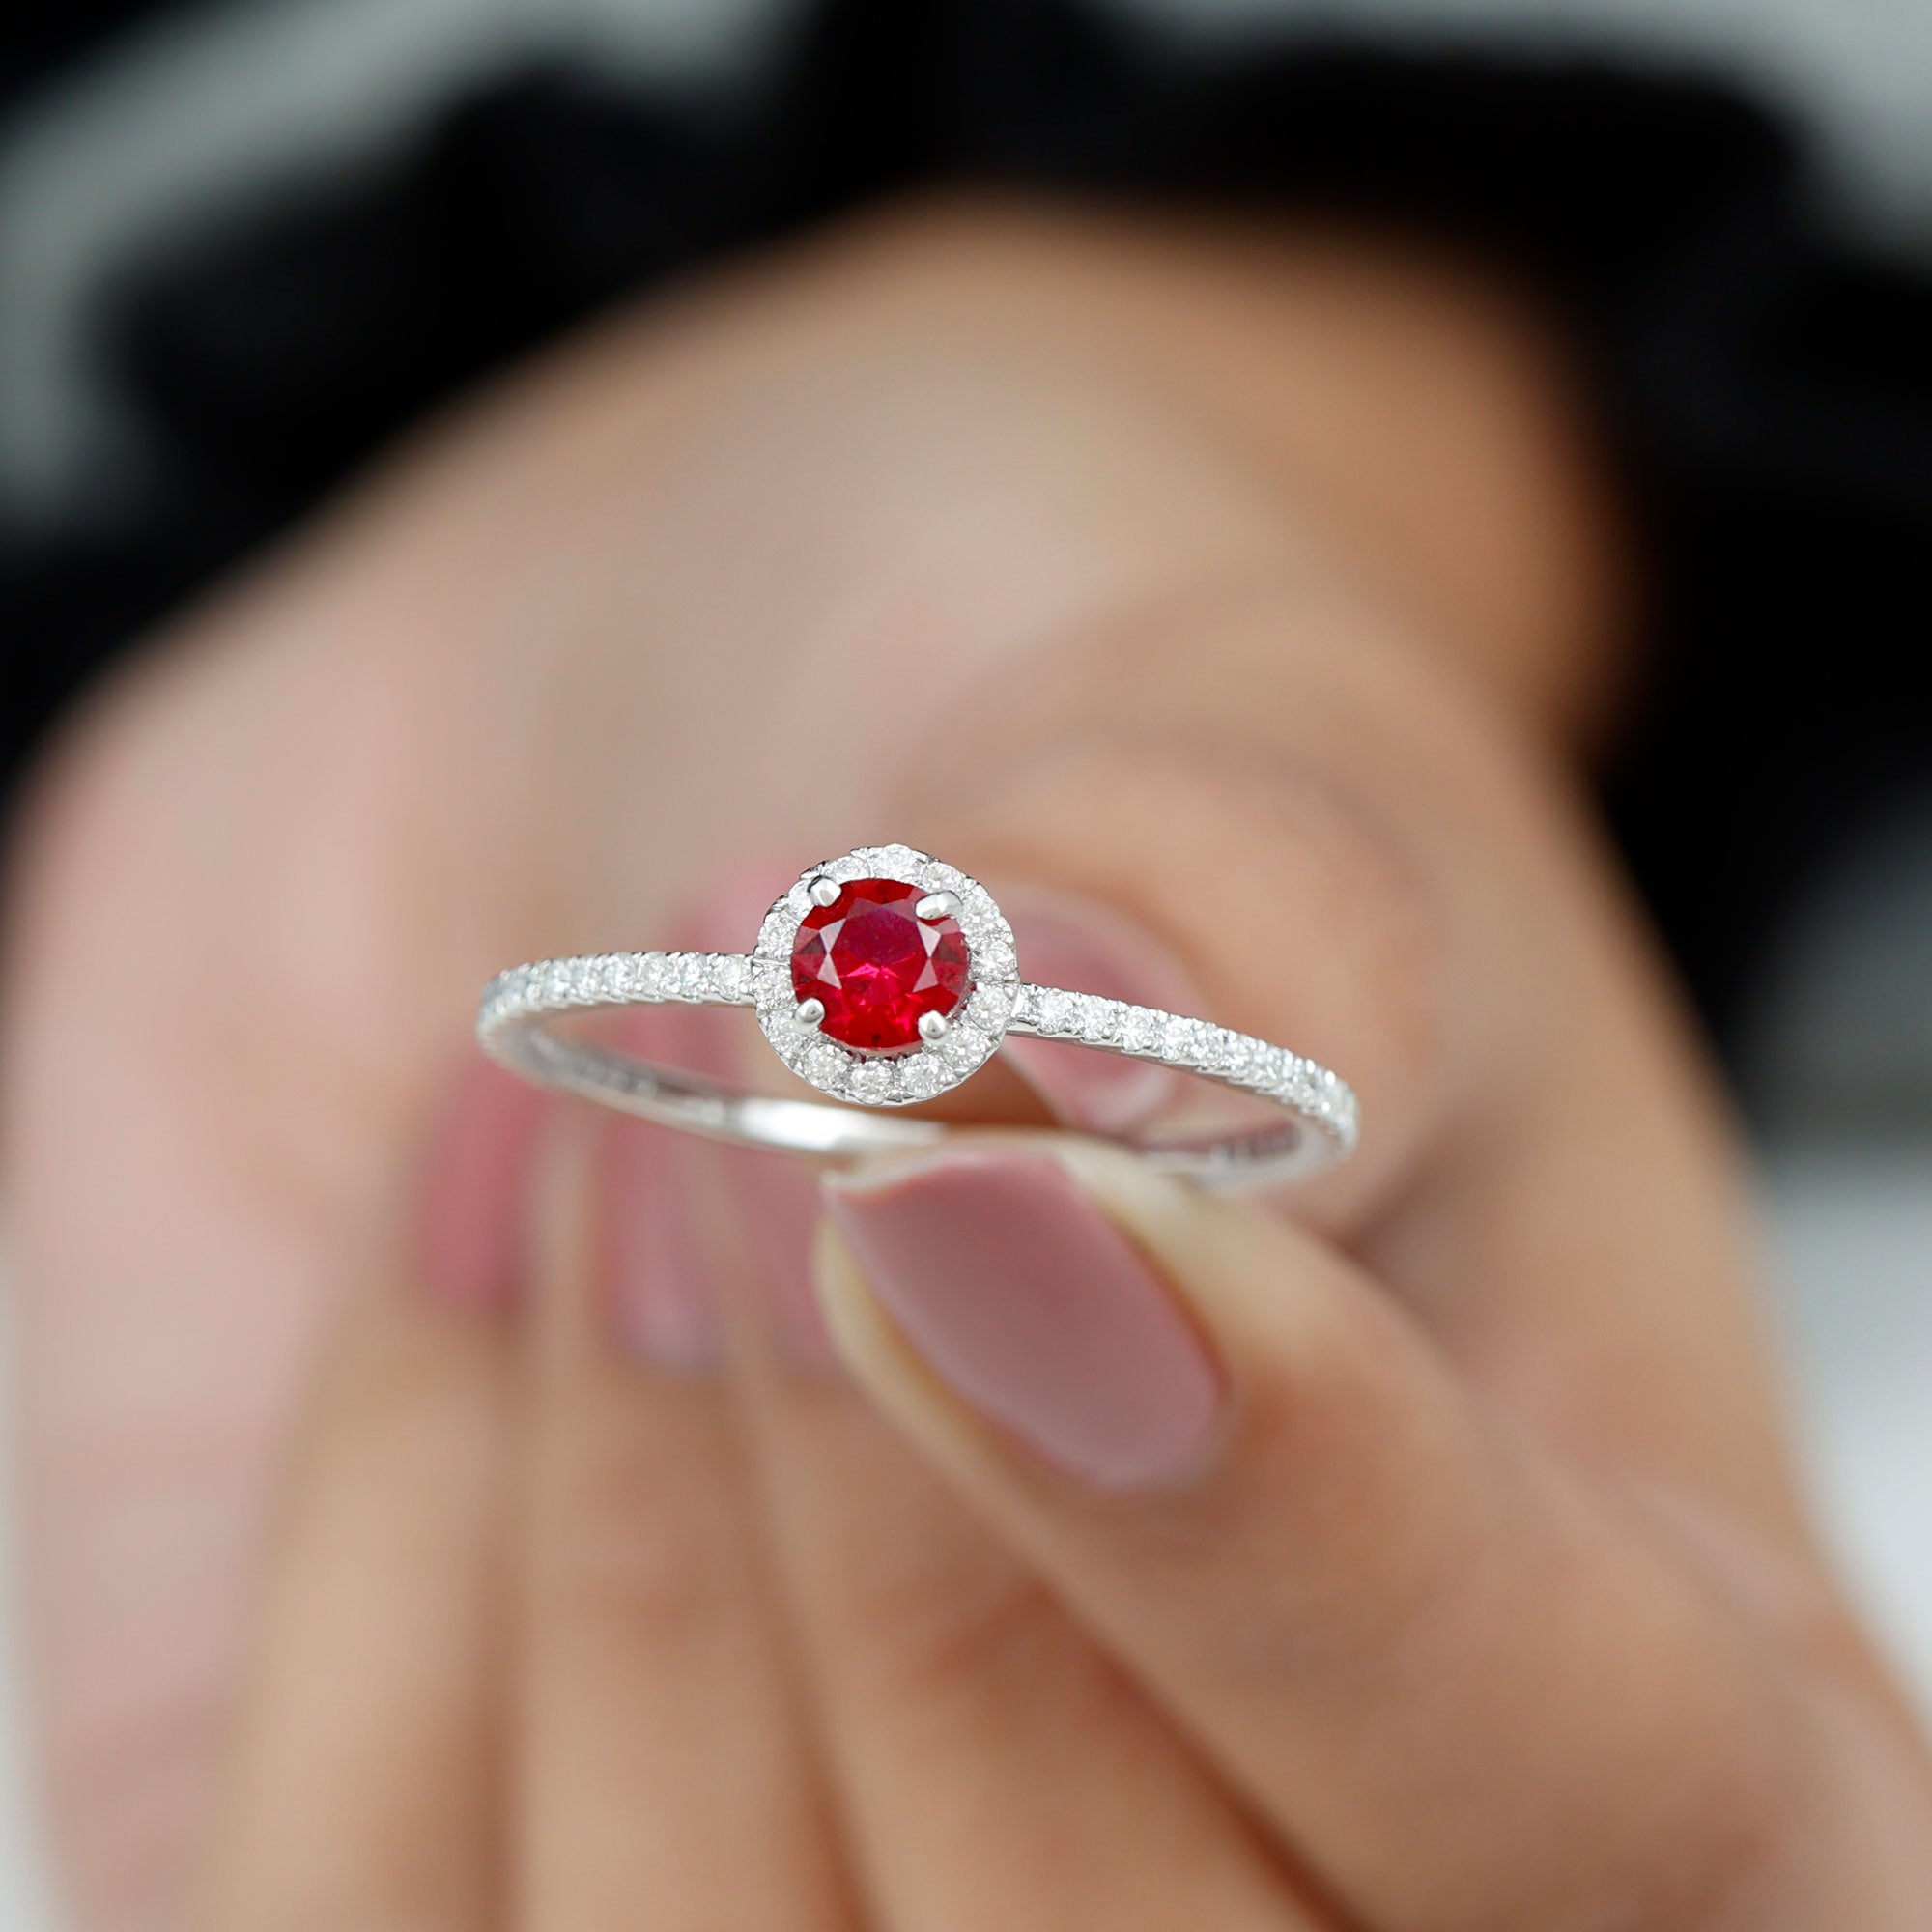 1 CT Minimal Created Ruby and Diamond Engagement Ring Lab Created Ruby - ( AAAA ) - Quality - Rosec Jewels